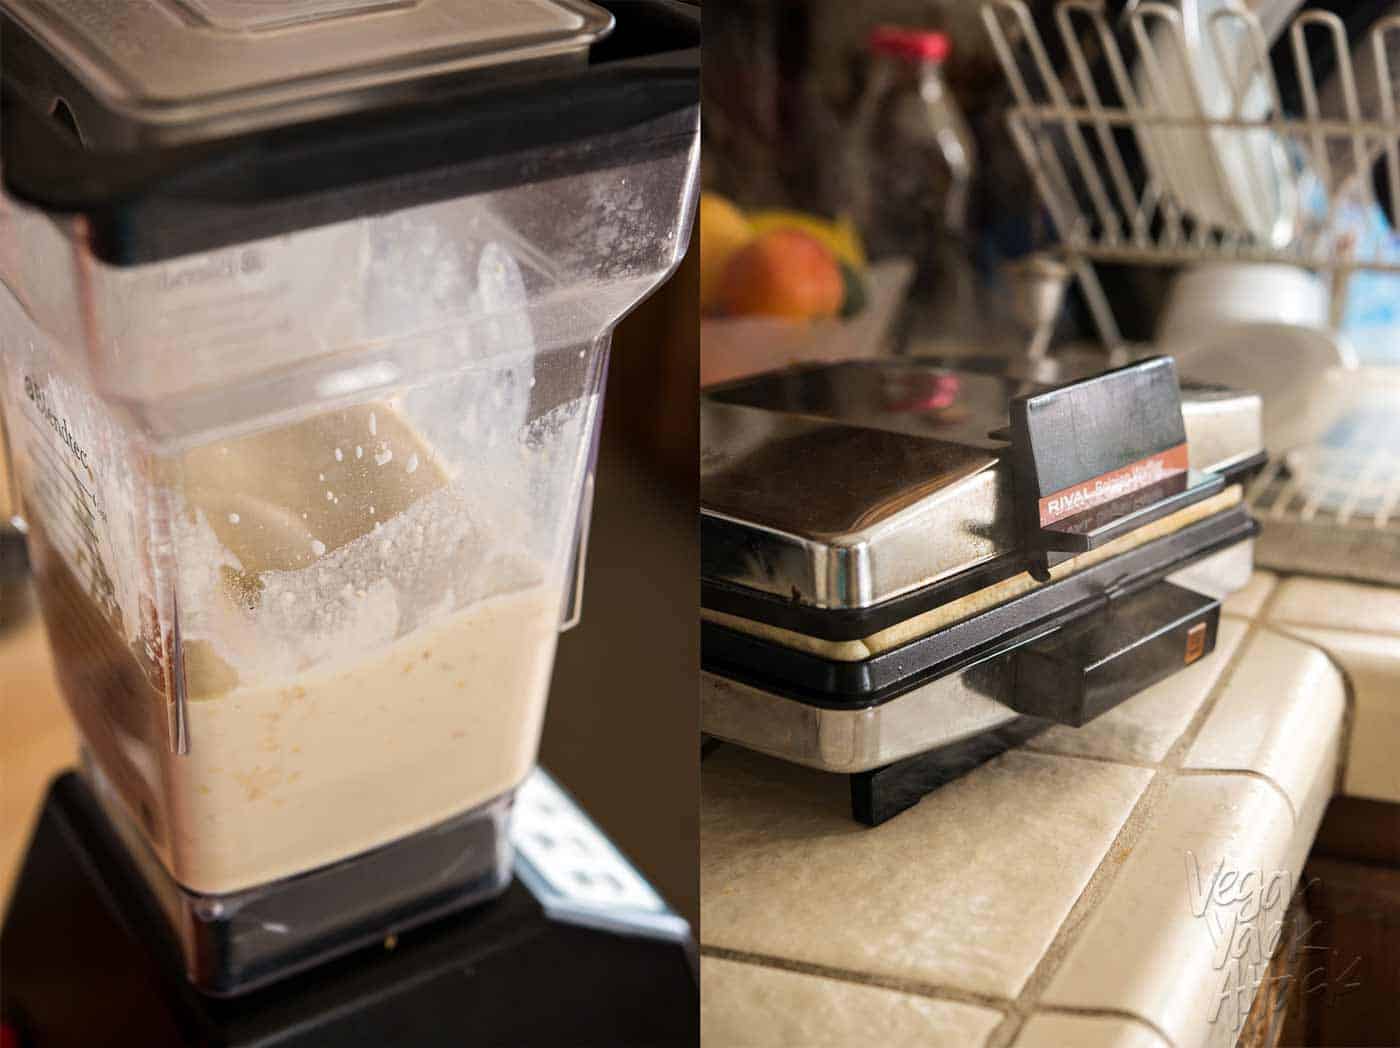 image collage of batter in a blender and waffle maker